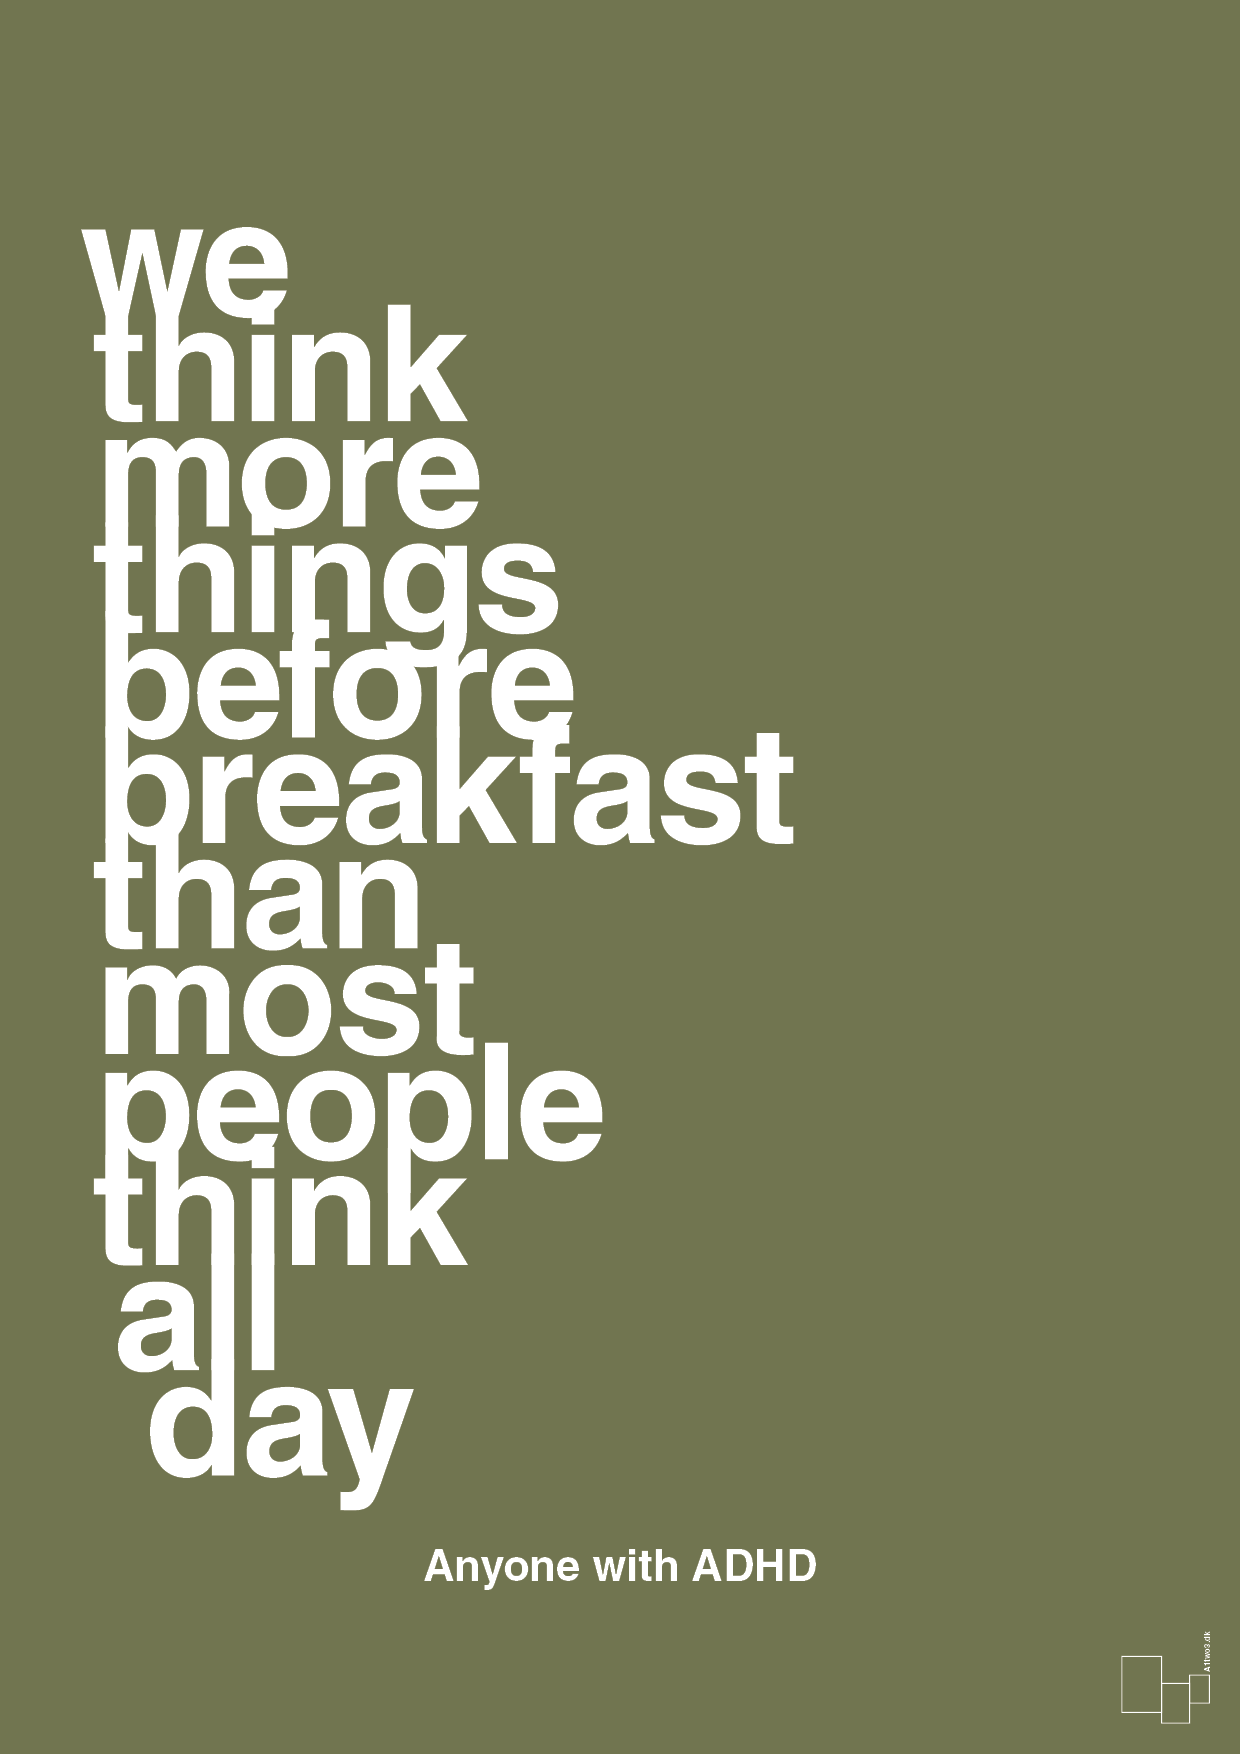 we think more things before breakfast than most people think all day - Plakat med Samfund i Secret Meadow